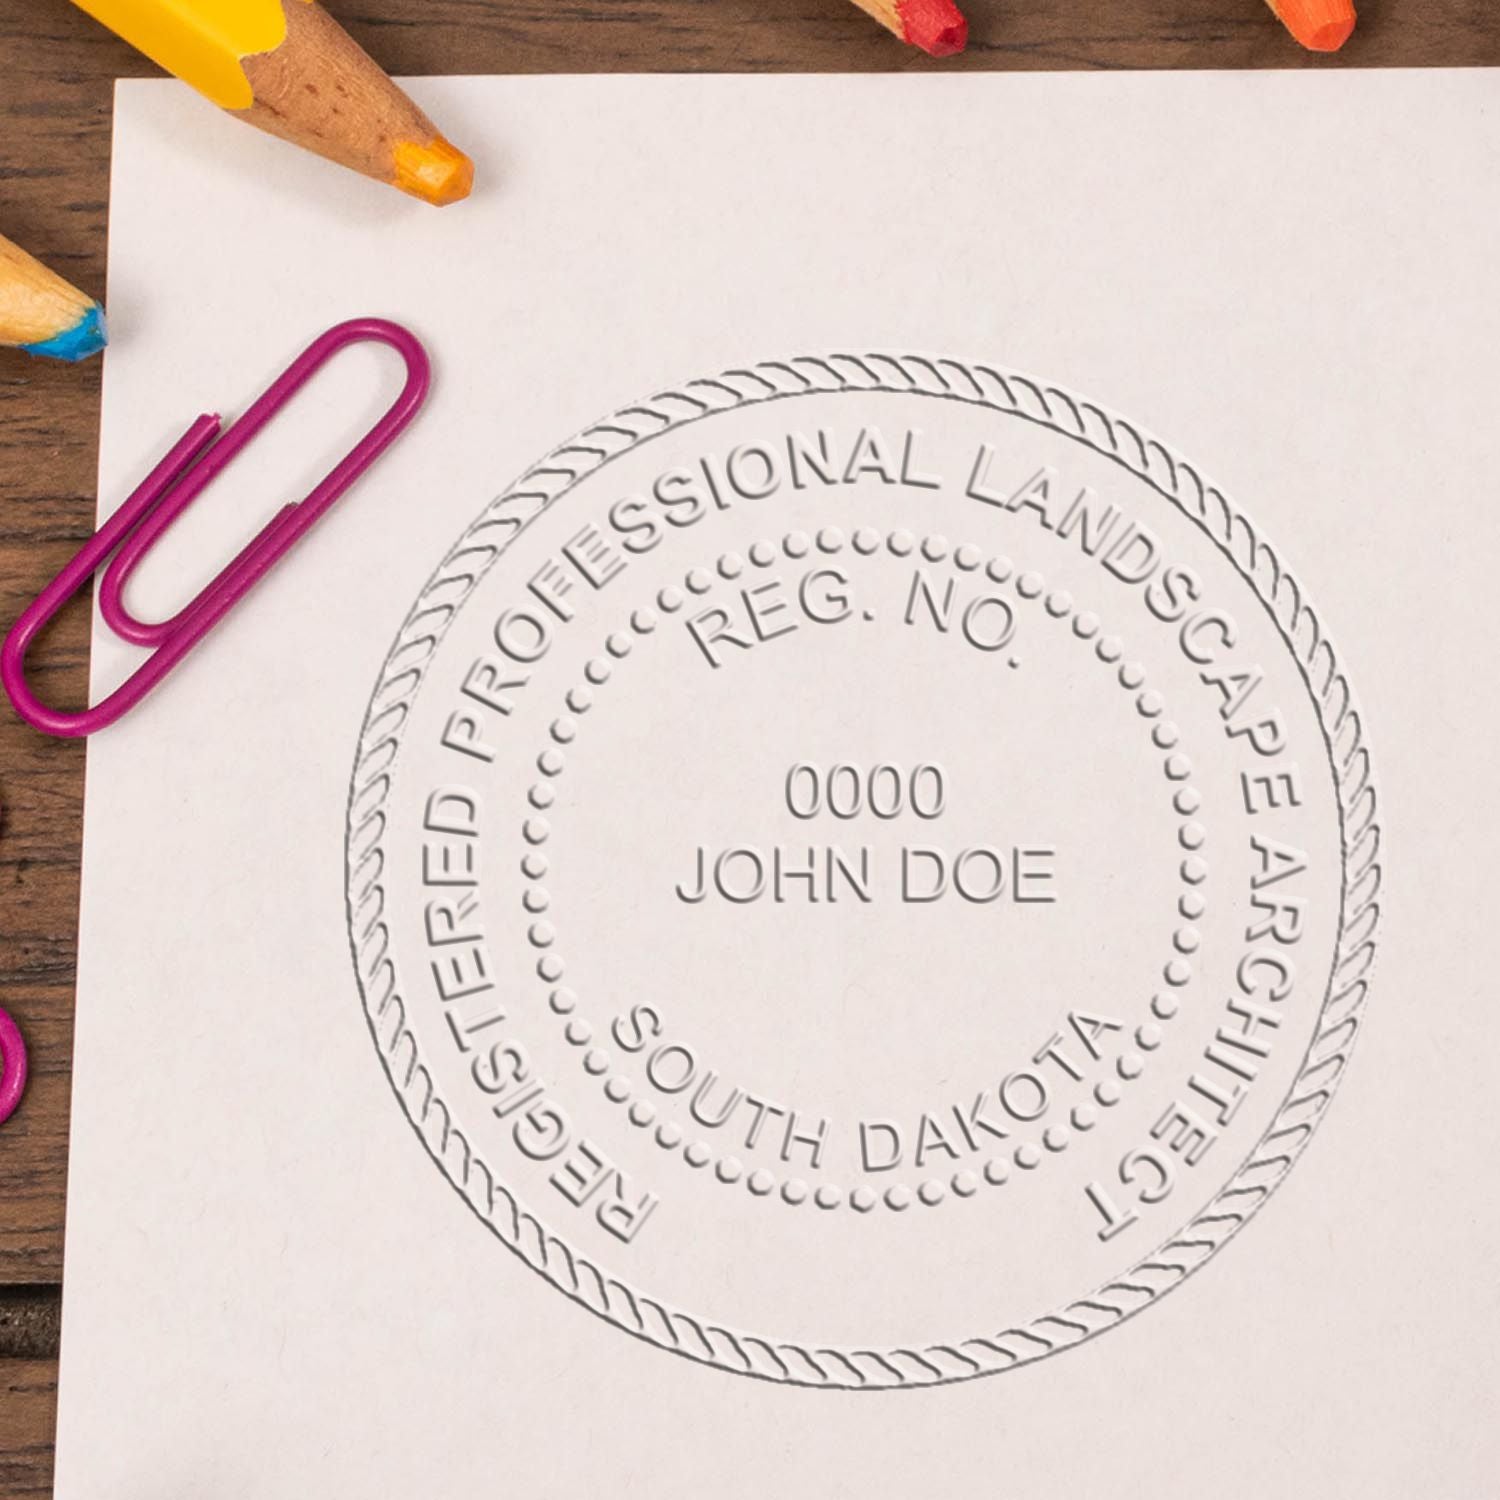 The Gift South Dakota Landscape Architect Seal stamp impression comes to life with a crisp, detailed image stamped on paper - showcasing true professional quality.